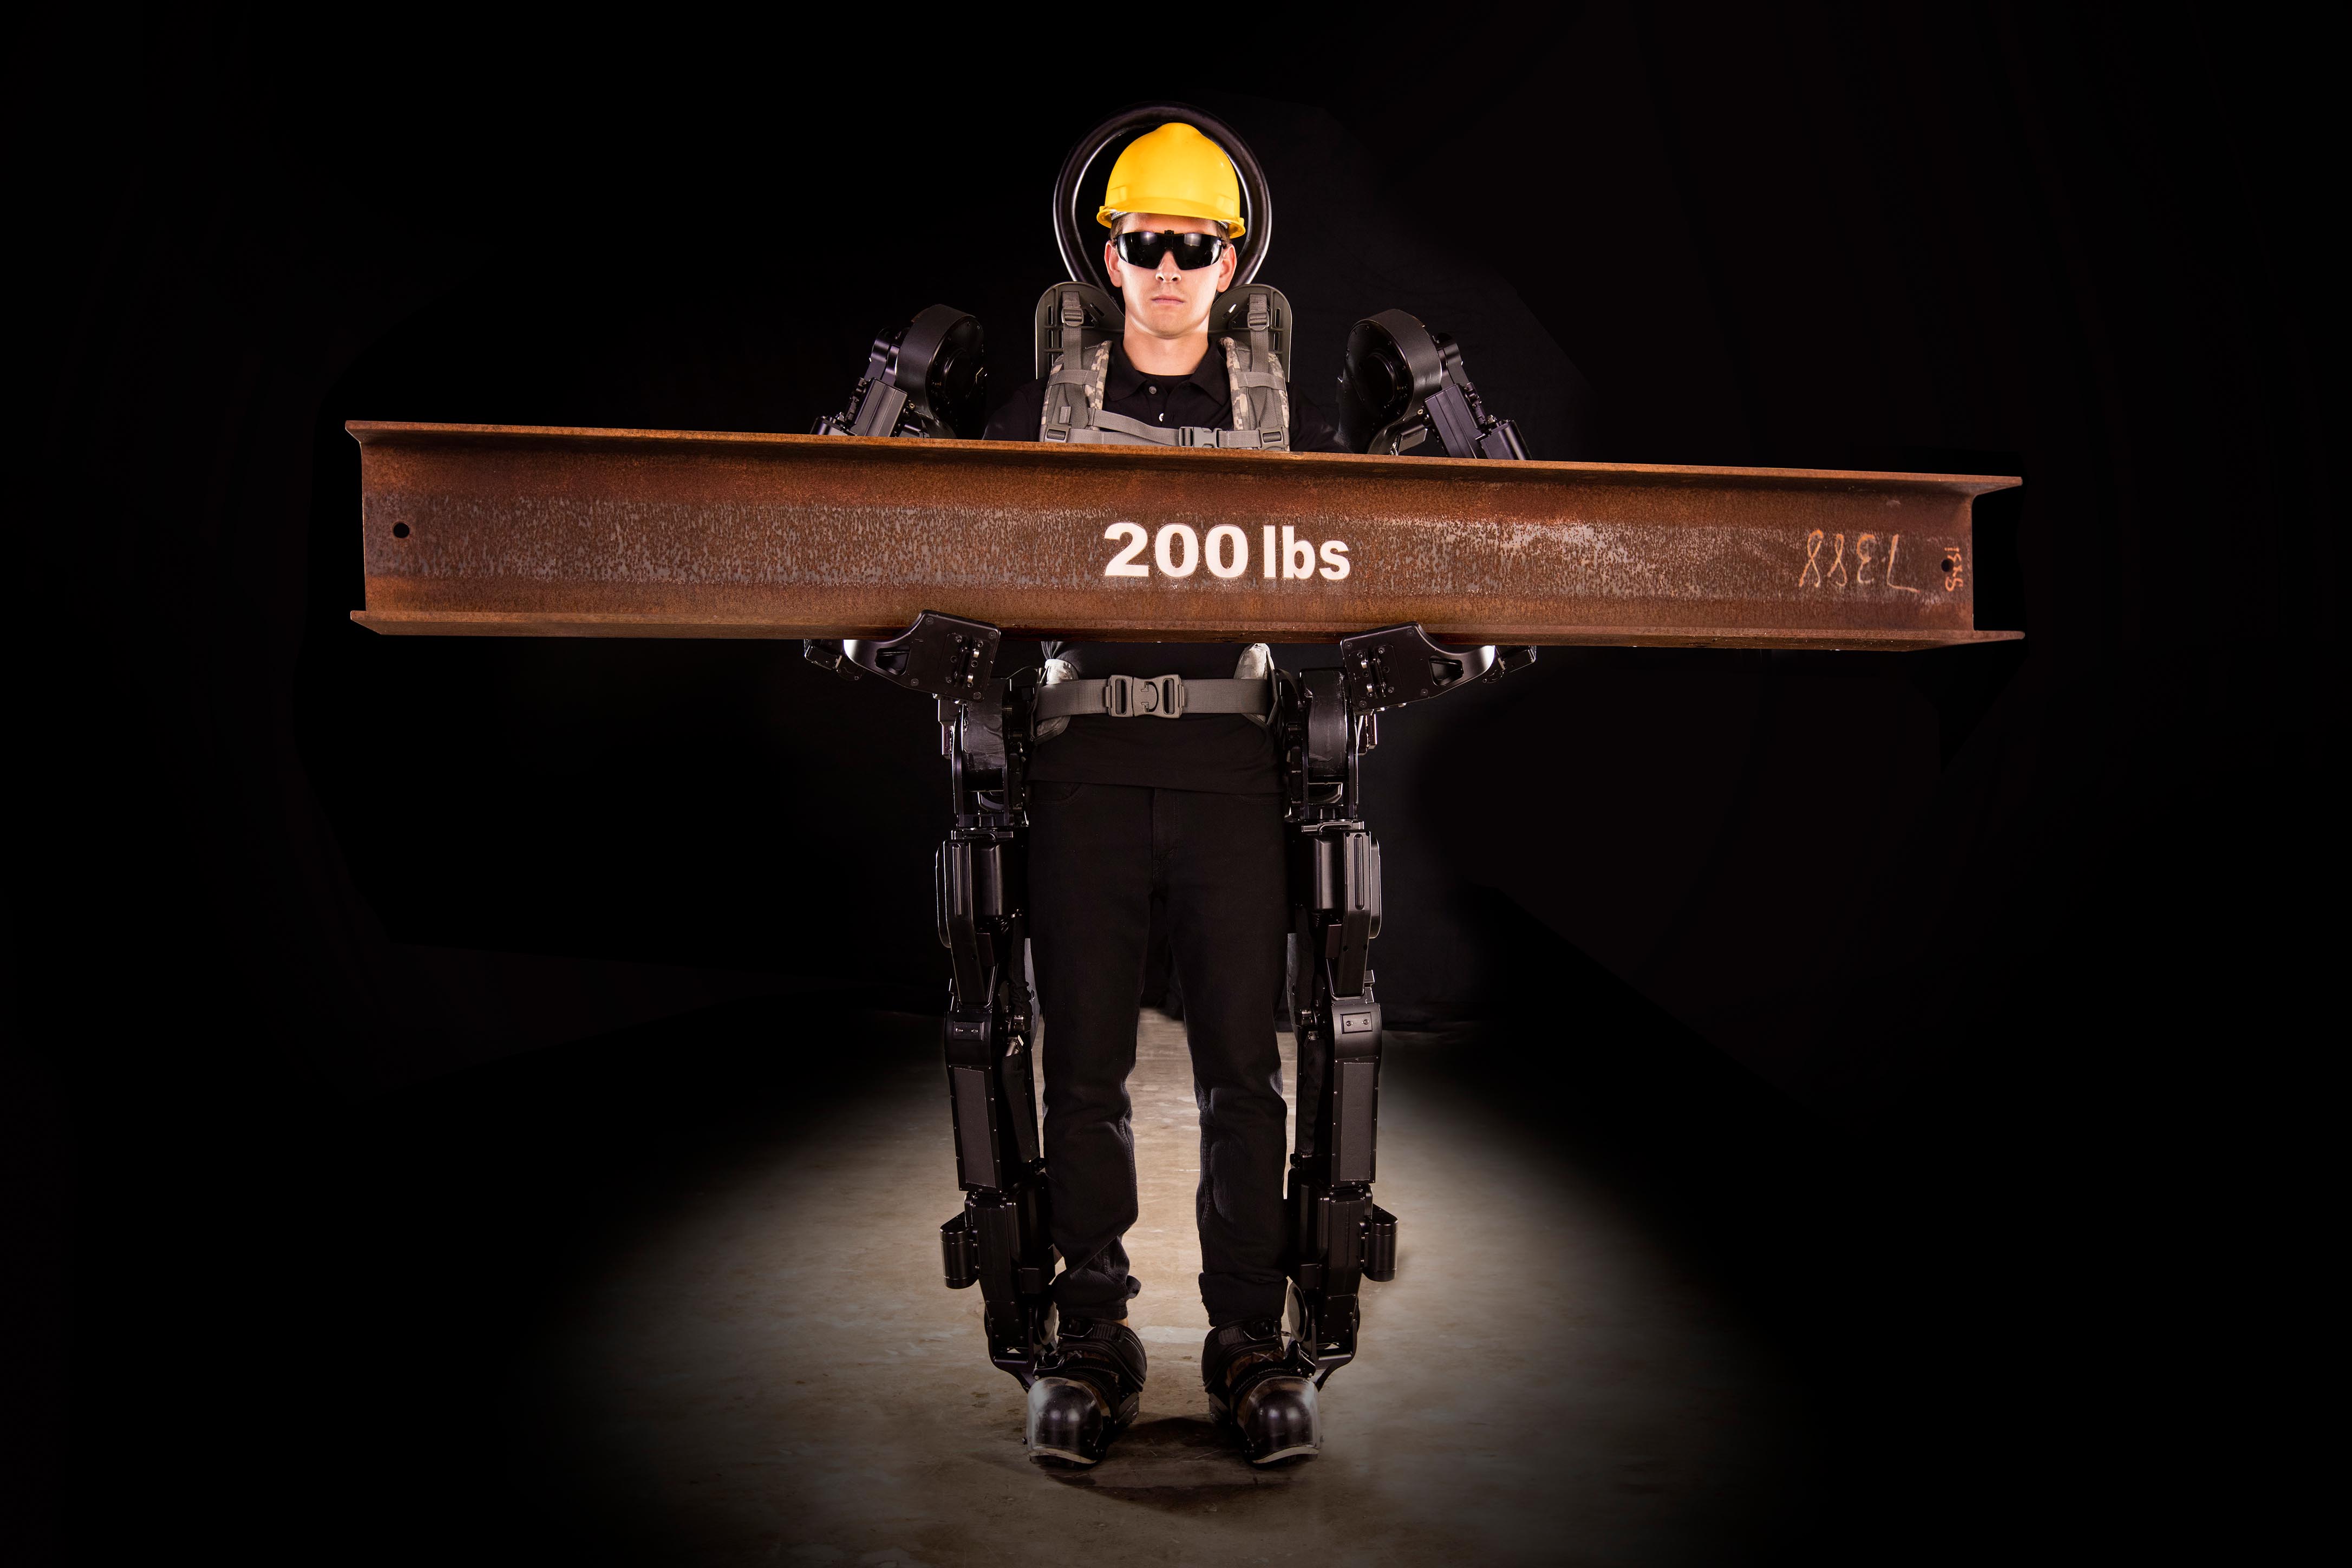 Guardian XO robotic exosuit by Sarcos Image courtesy of Sarcos Corp. https://www.sarcos.com